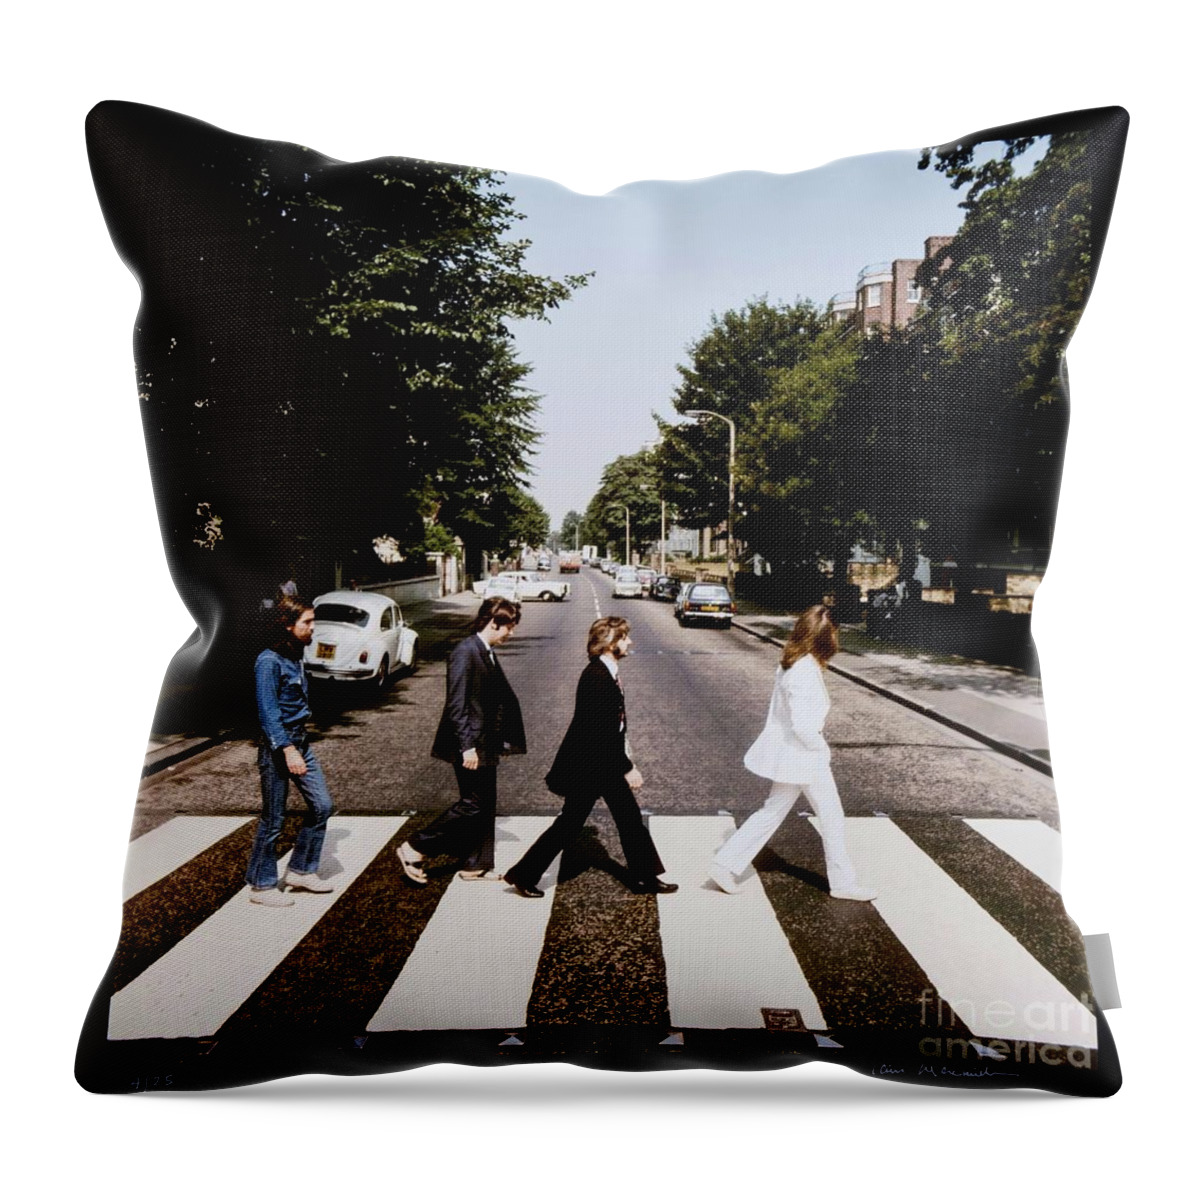 Beatles Throw Pillow featuring the photograph Beatles Album Cover by Action